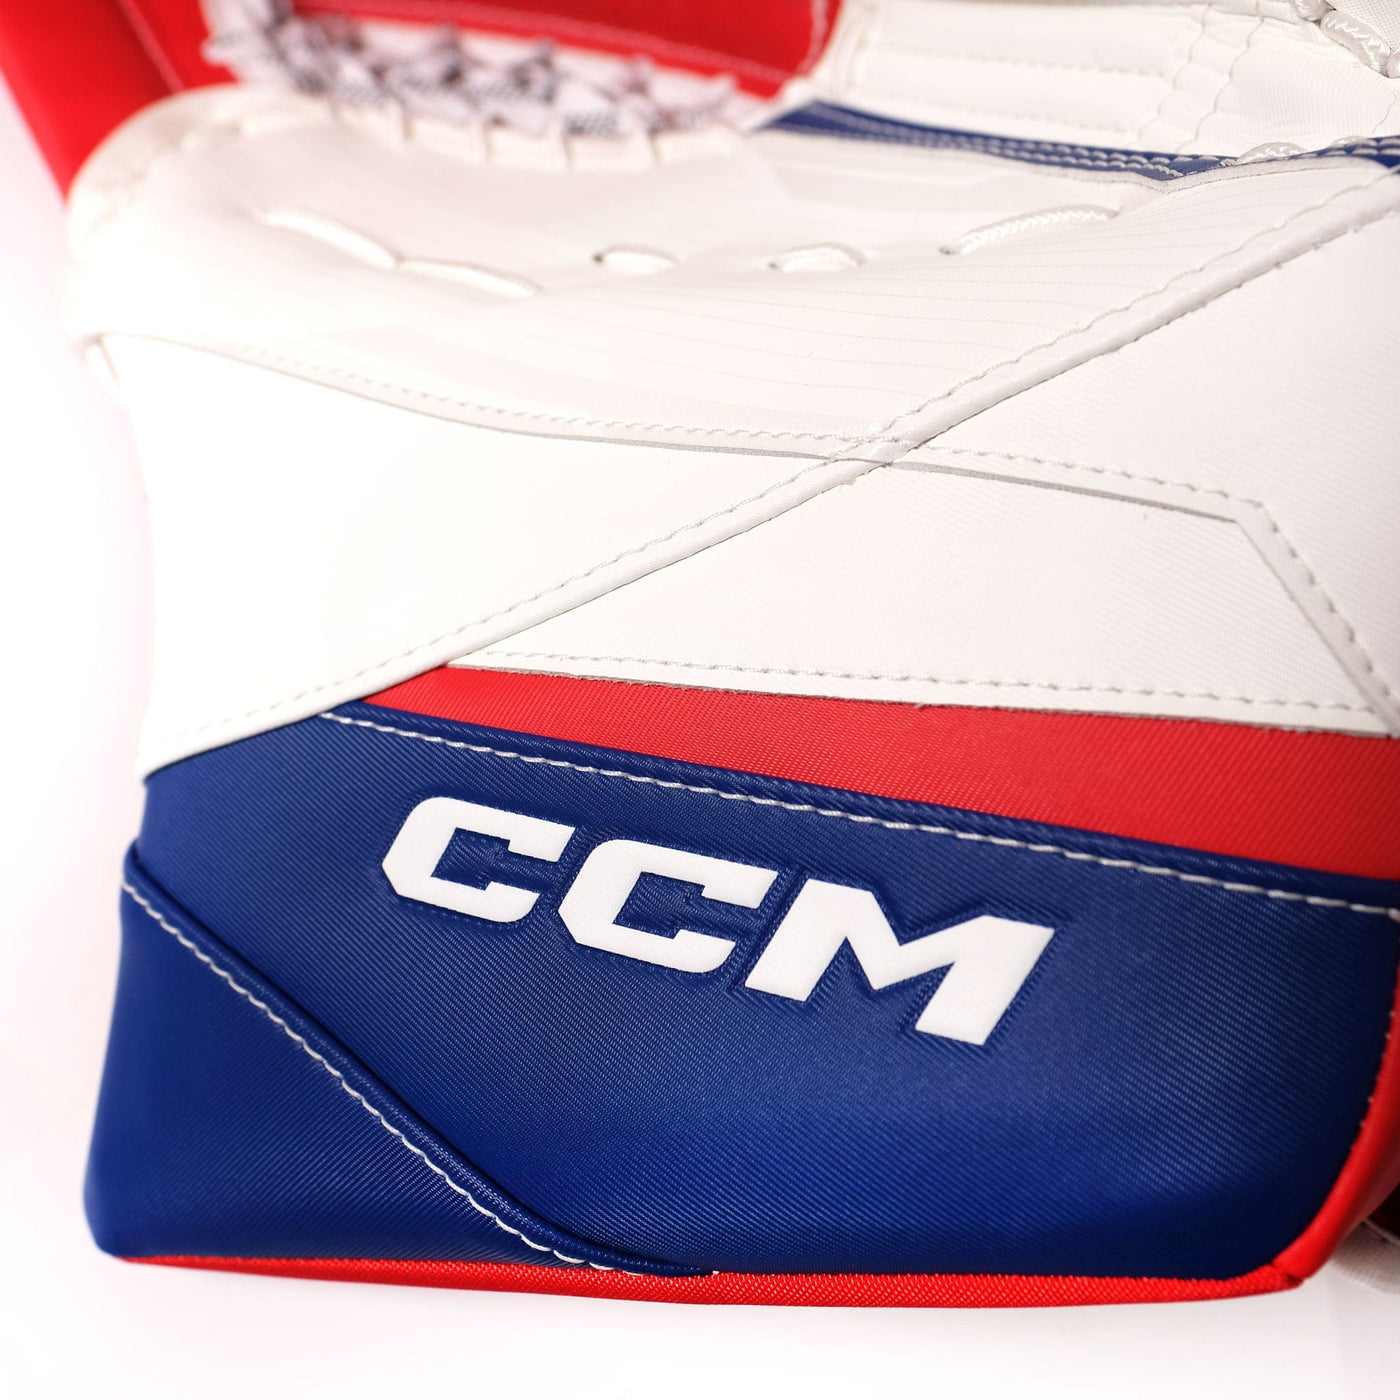 CCM Axis 2 Senior Goalie Catcher - 590 Degree - The Hockey Shop Source For Sports